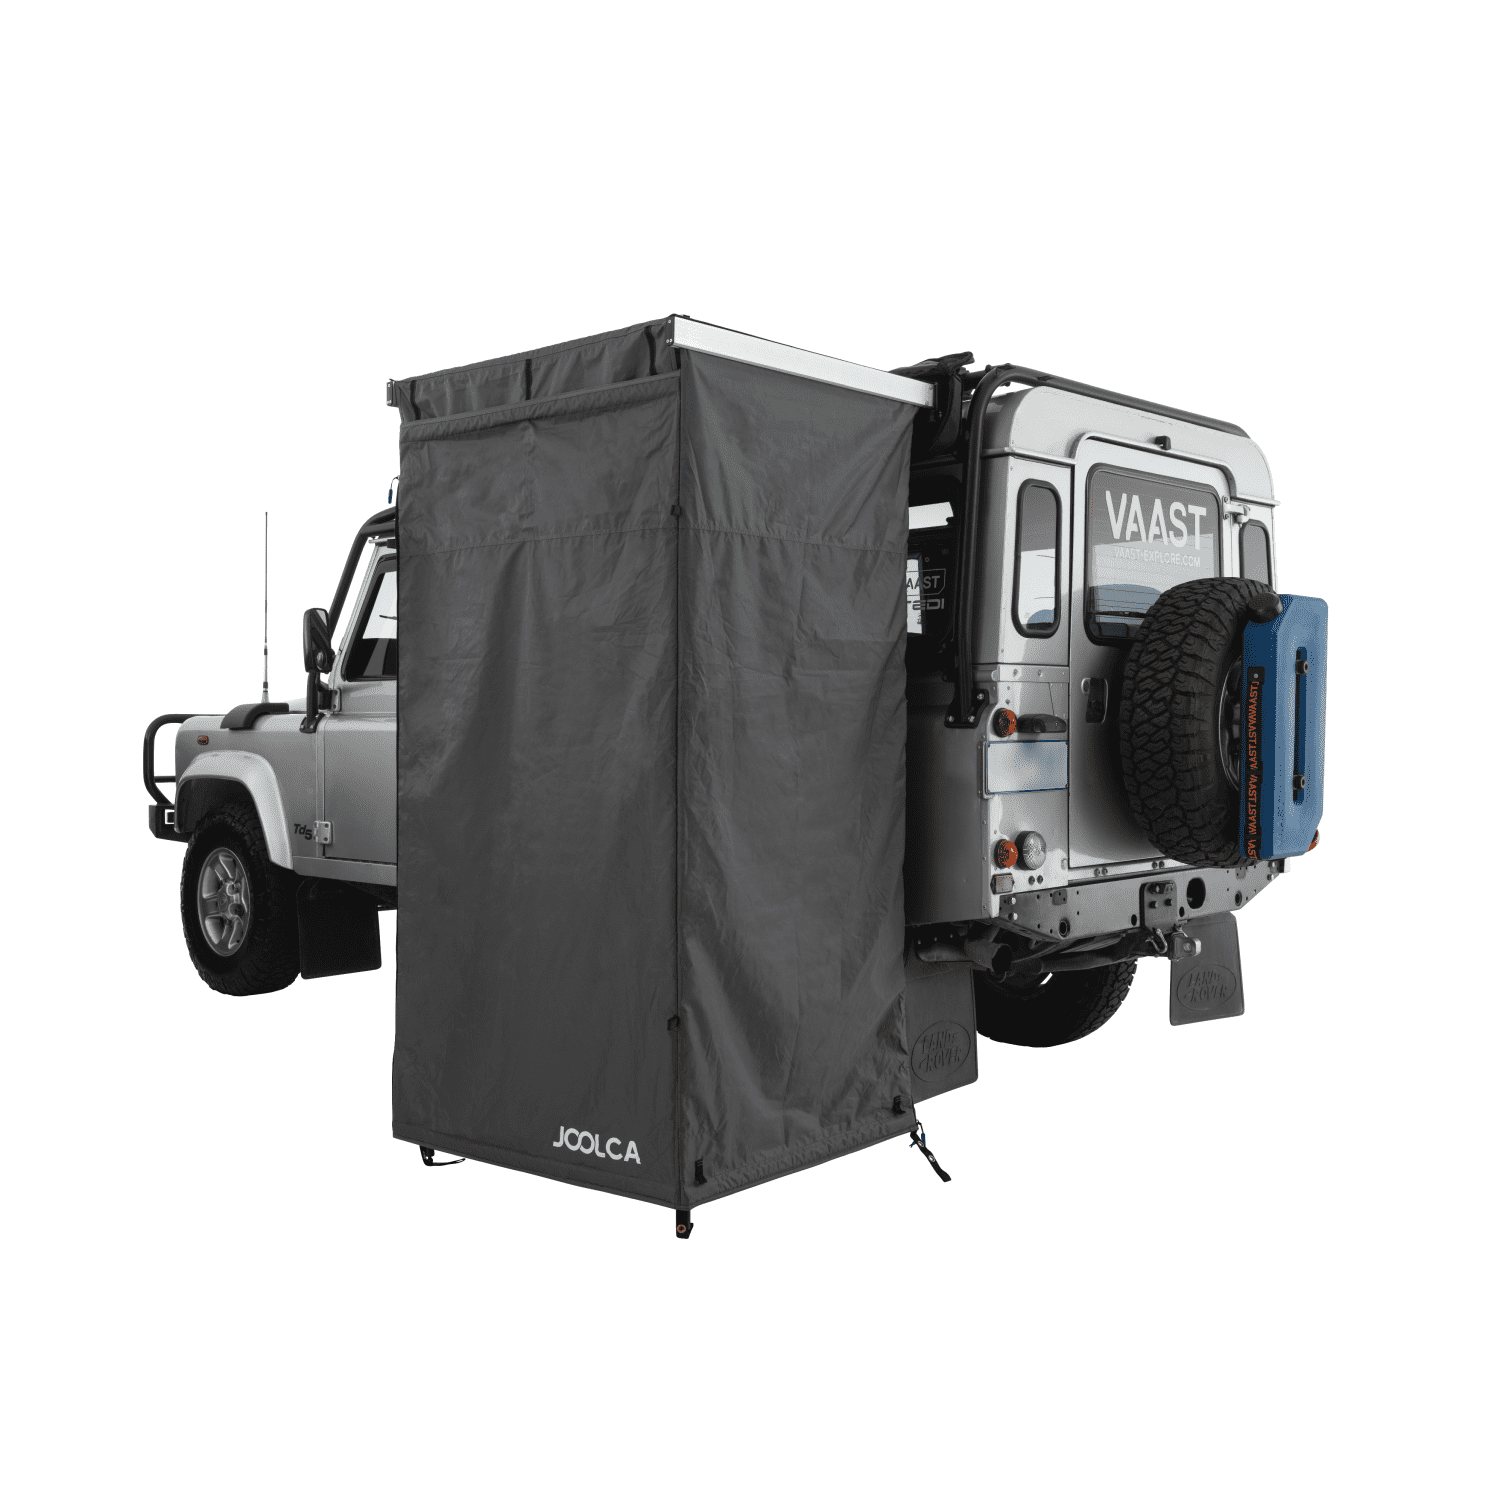 A single room mounted shower tent attached to a 4WD